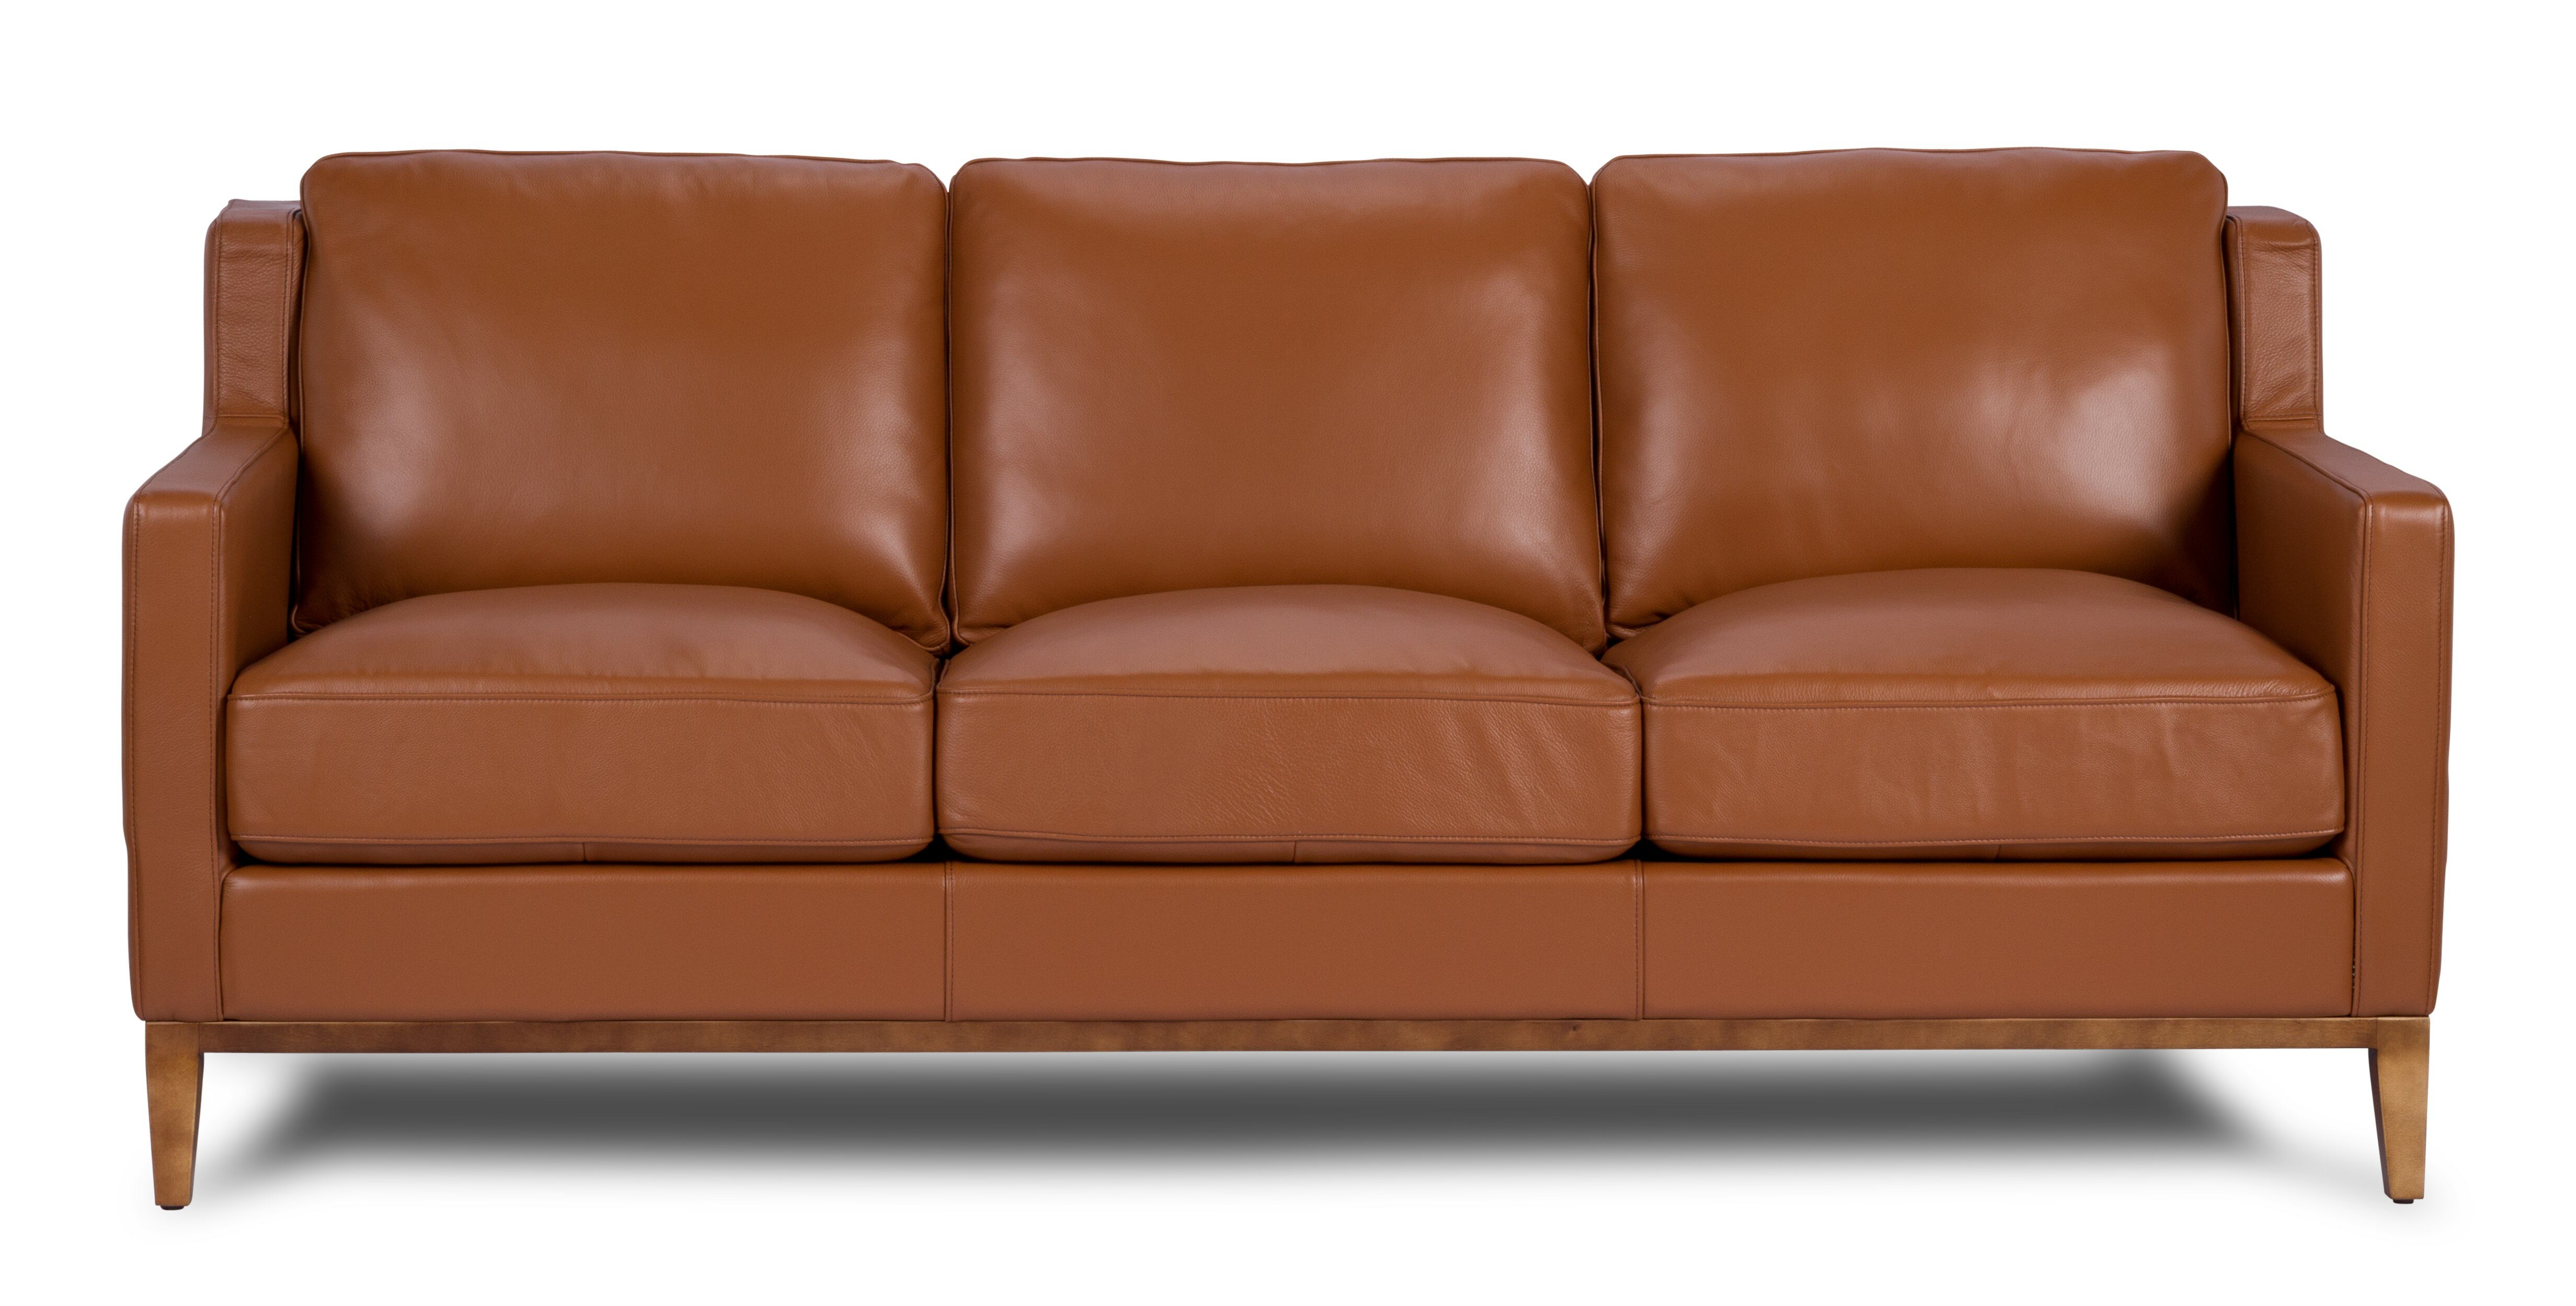 Sepia Brown Leather Grain Breathables Upholstery Fabric by The Yard